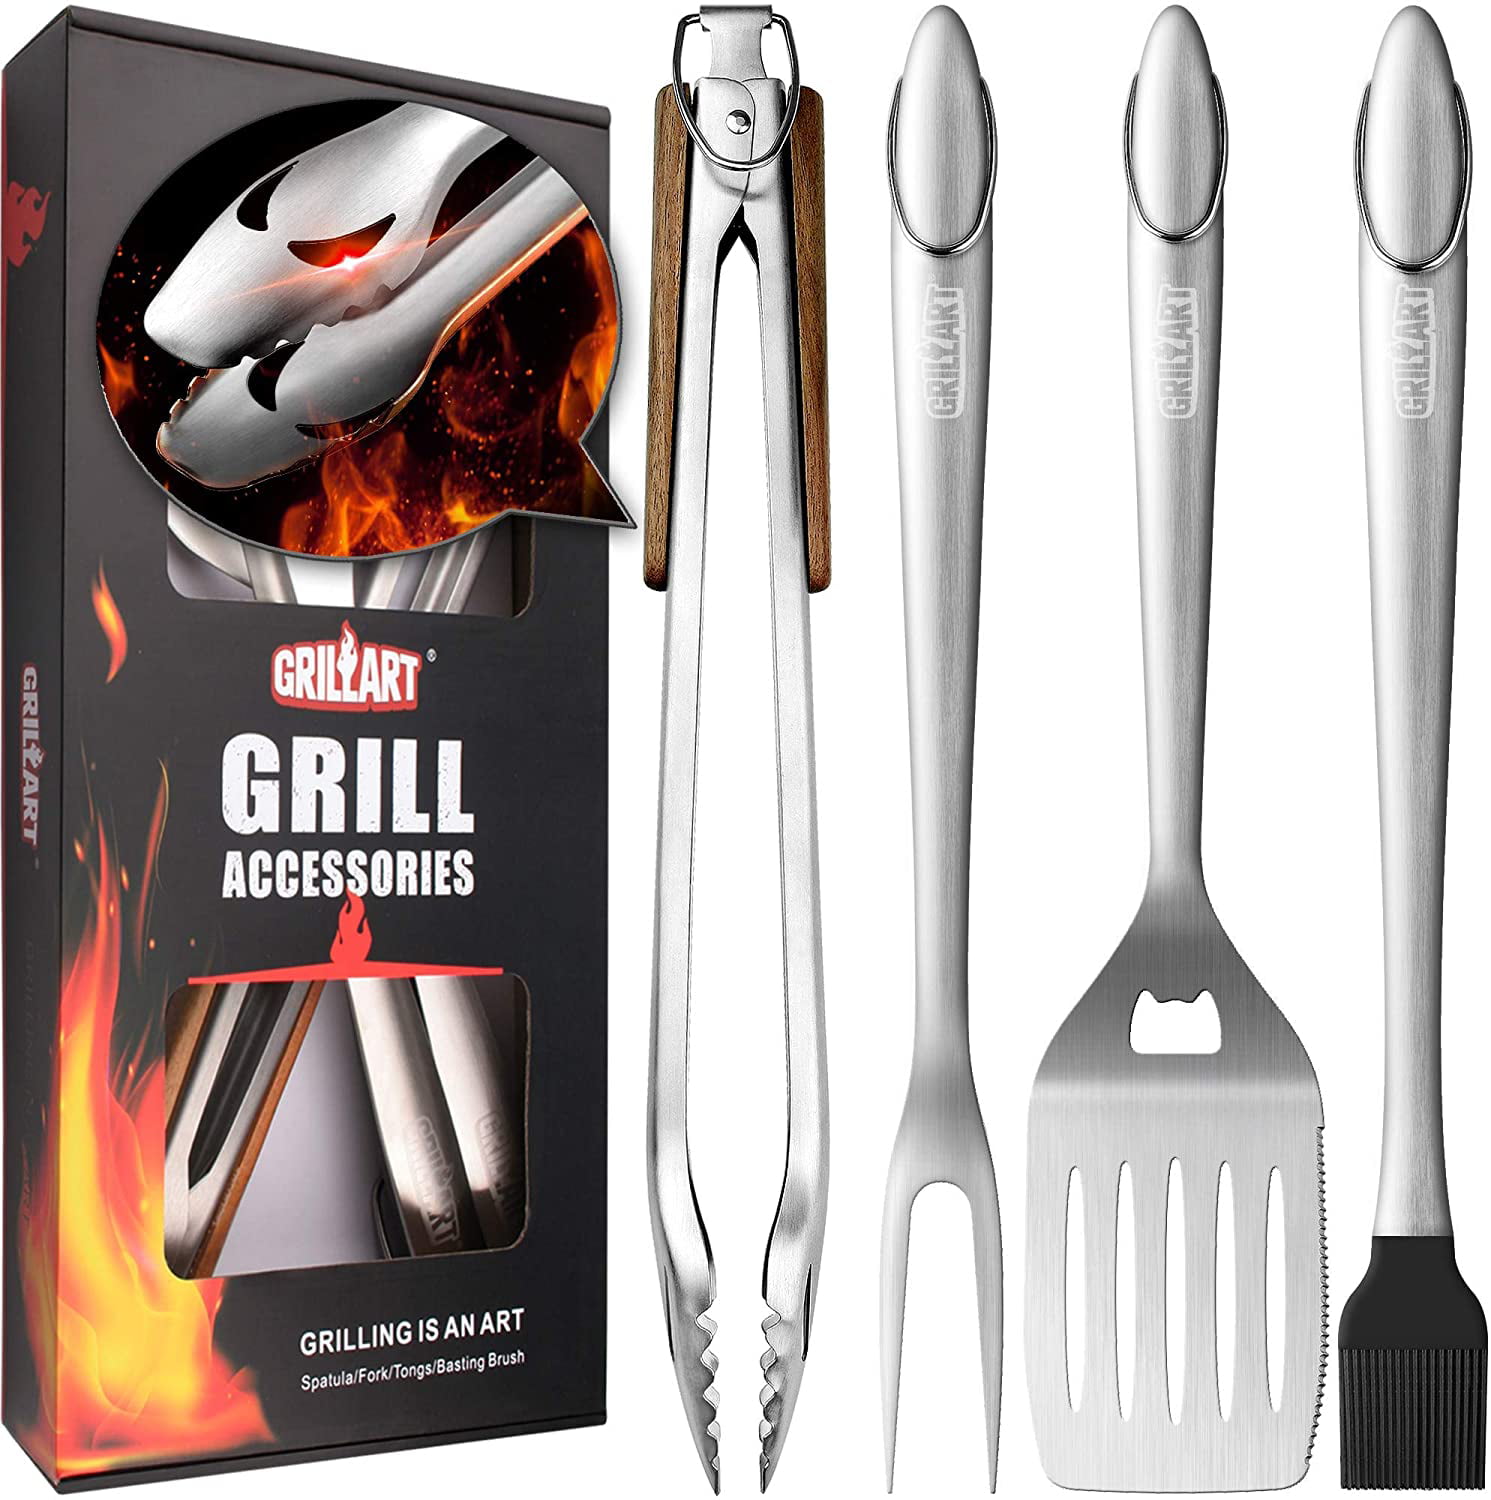 1X Stylish Stainless Steel Mesh Folder Grill  Accessories Barbecue Tools Durable 